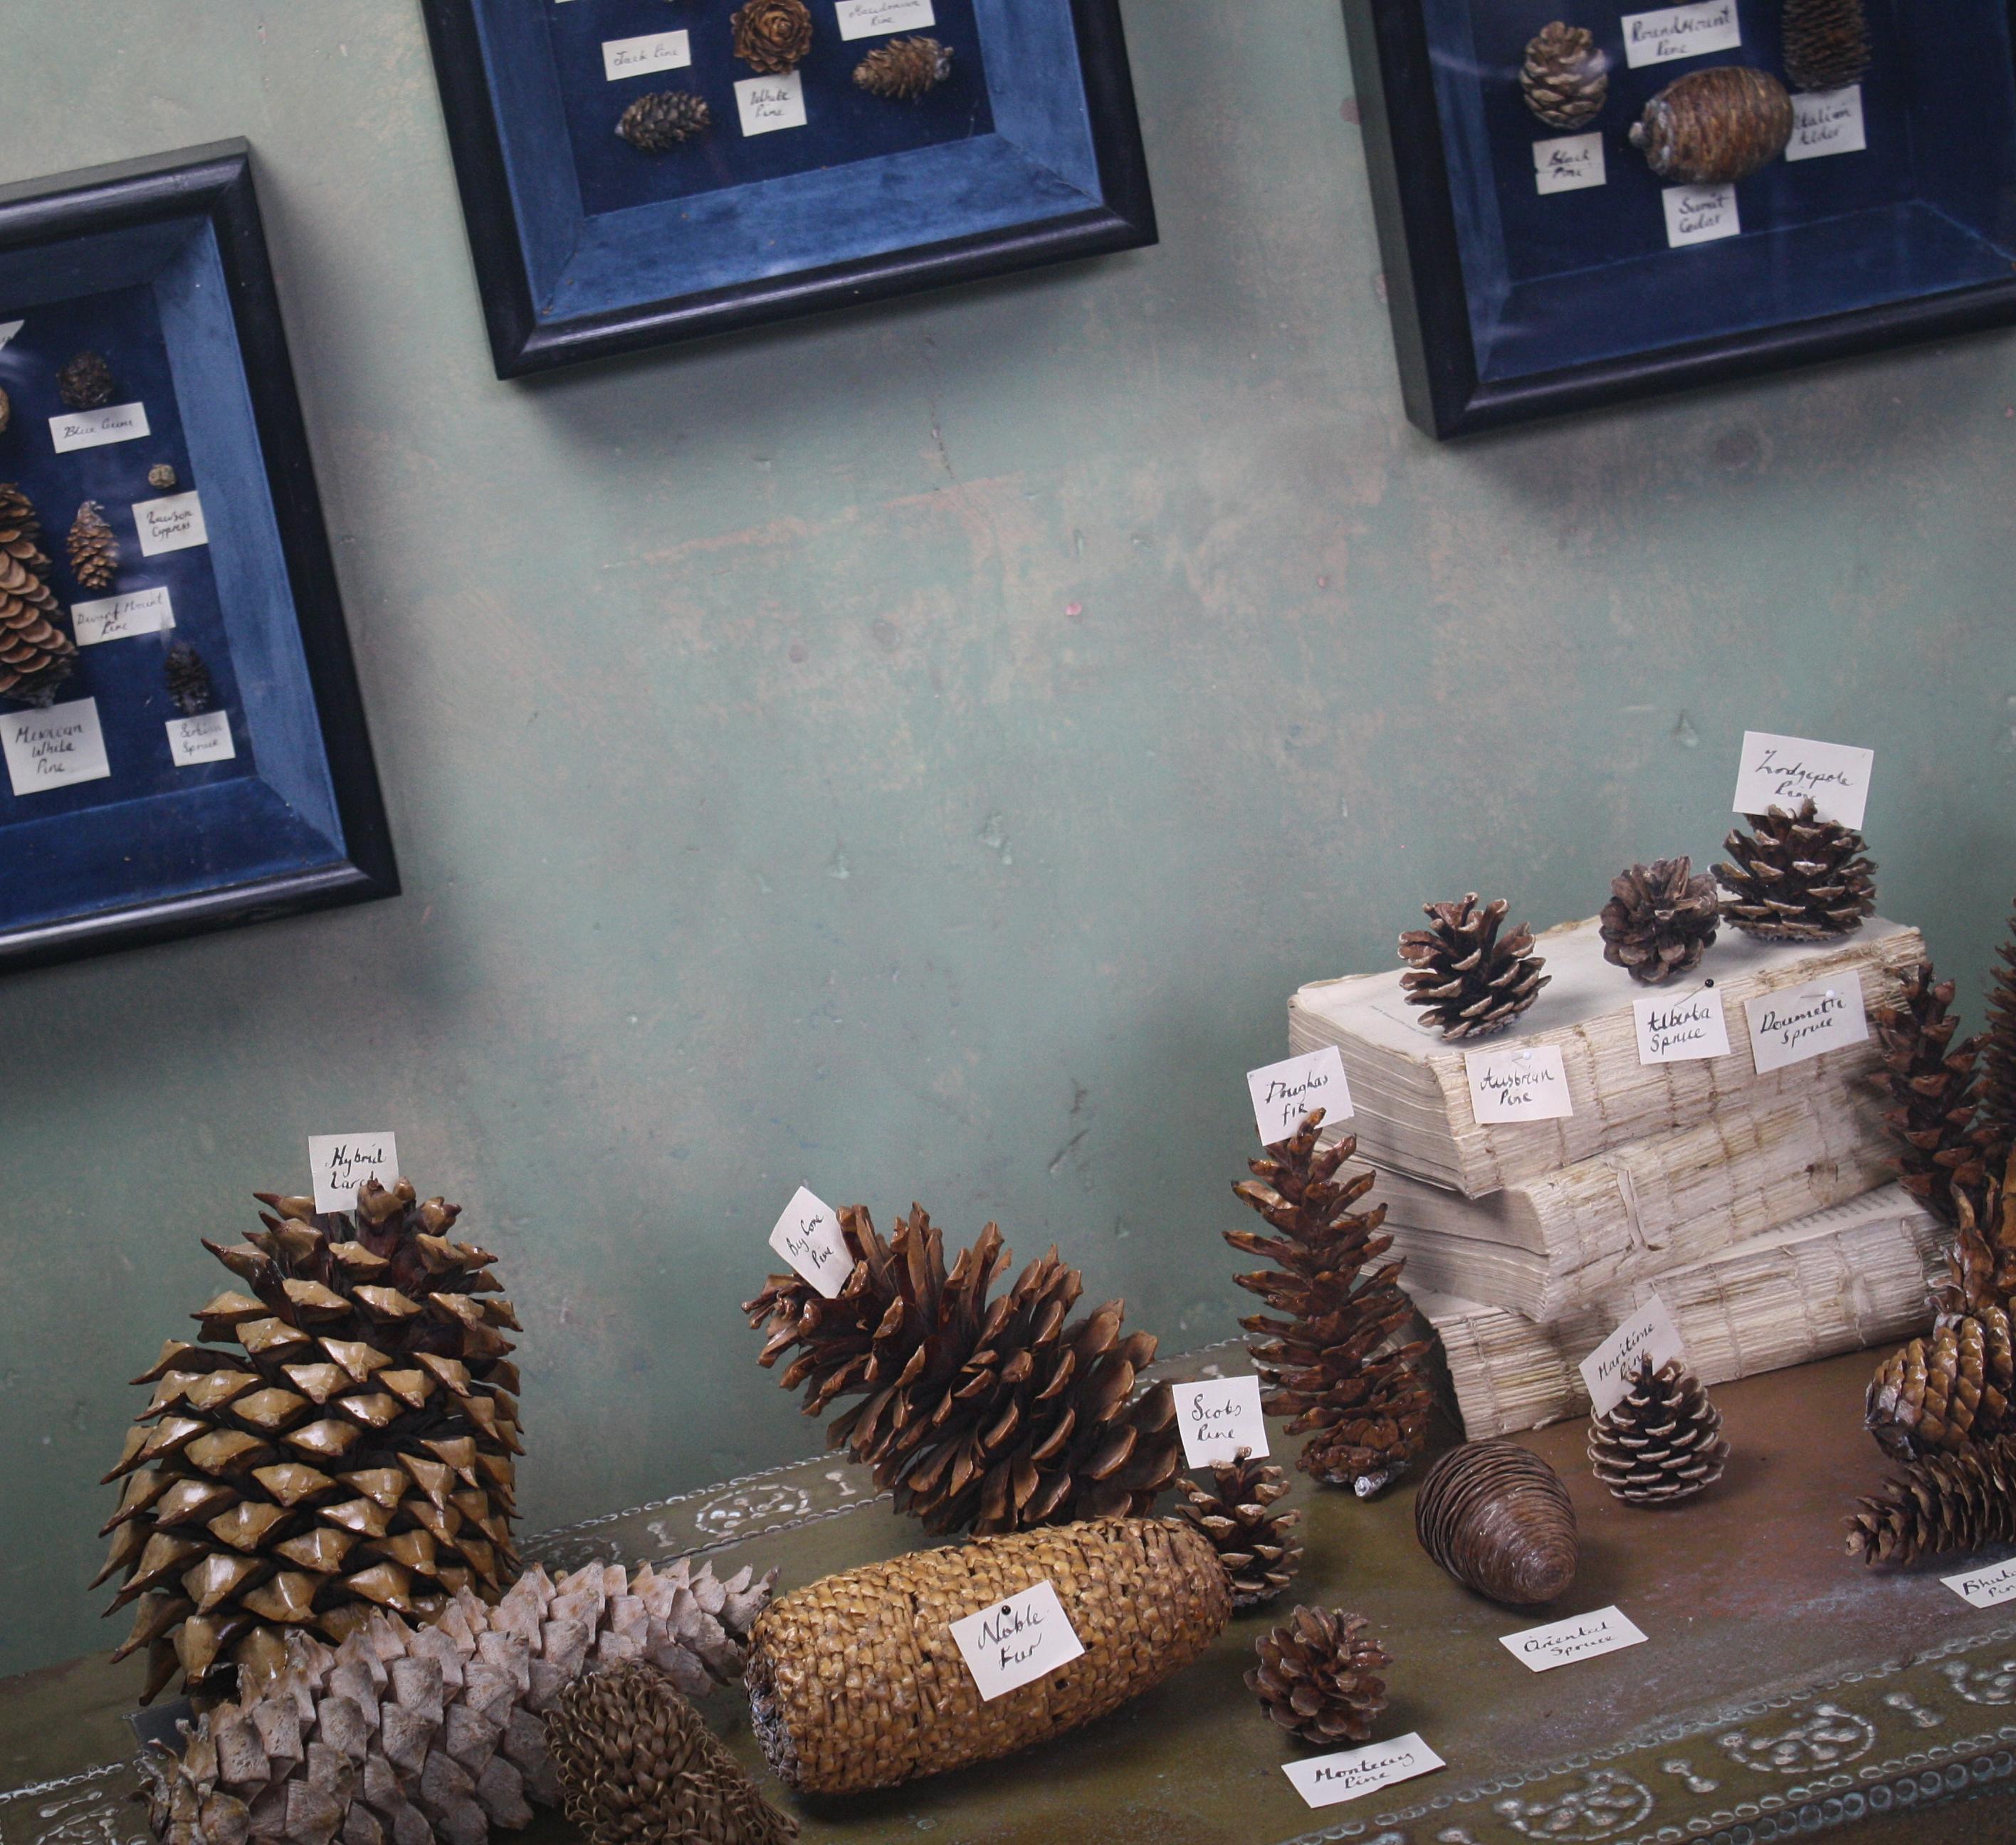 A collection of sixty nine ferns with original hand written labels 

From the early part of the 20th century, we have had the smaller thirty nine mounted in bespoke made shadow boxes constructed from pine with a royal blue velvet interior.

The